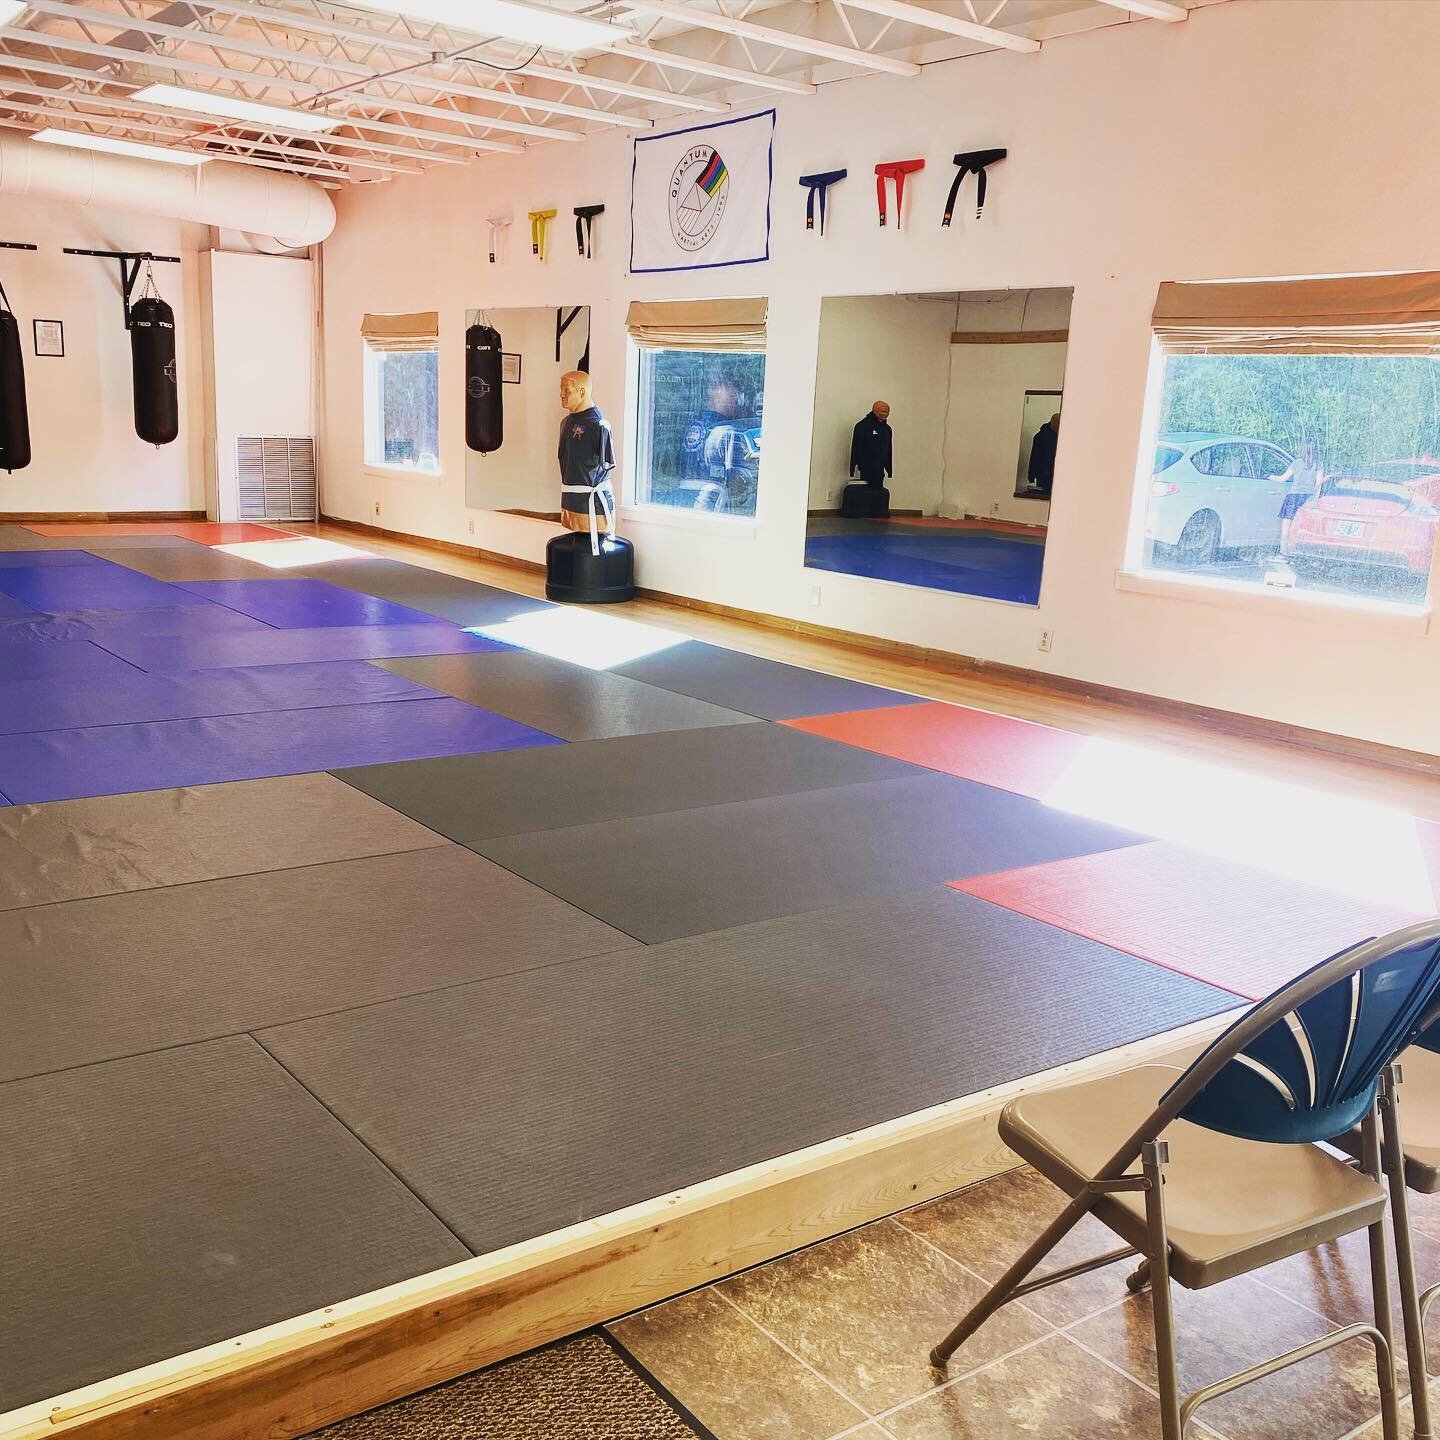 Dojo mat is framed in and ready for classes!  The Master is in town. Come join us tomorrow as we break in our new mat.  #buildingadojo #courtesy #integrity #perseverance #selfcontrol #indomitablespirit #portlandoregon @quantum_sf @quantum_seattle @br